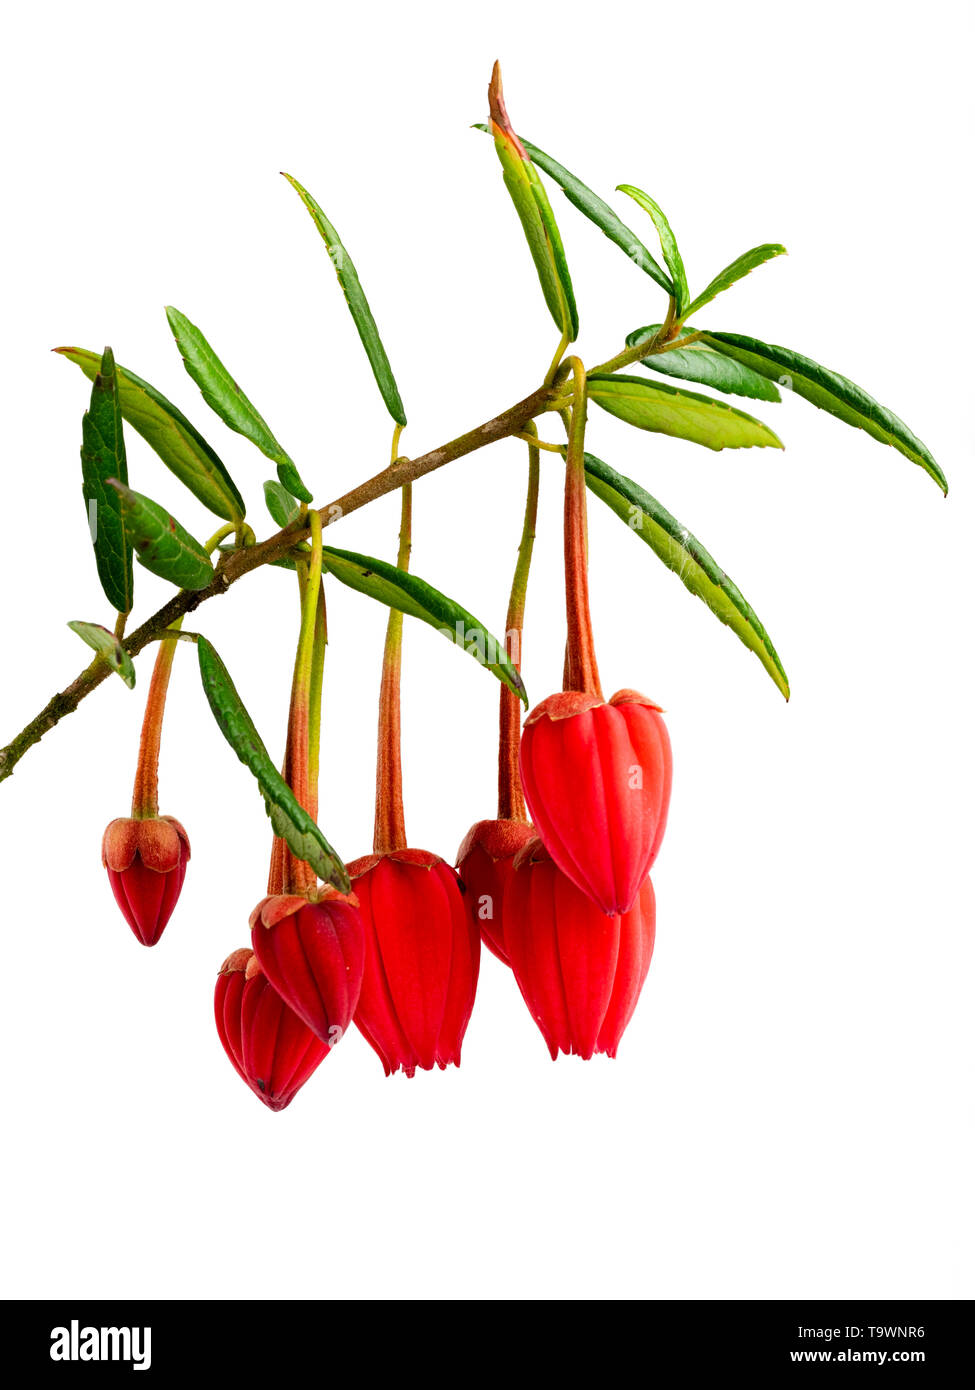 Hanging red, early summer flowers of the evergreen Chilean lantern tree, Crinodendron hookerianum, on a white background Stock Photo